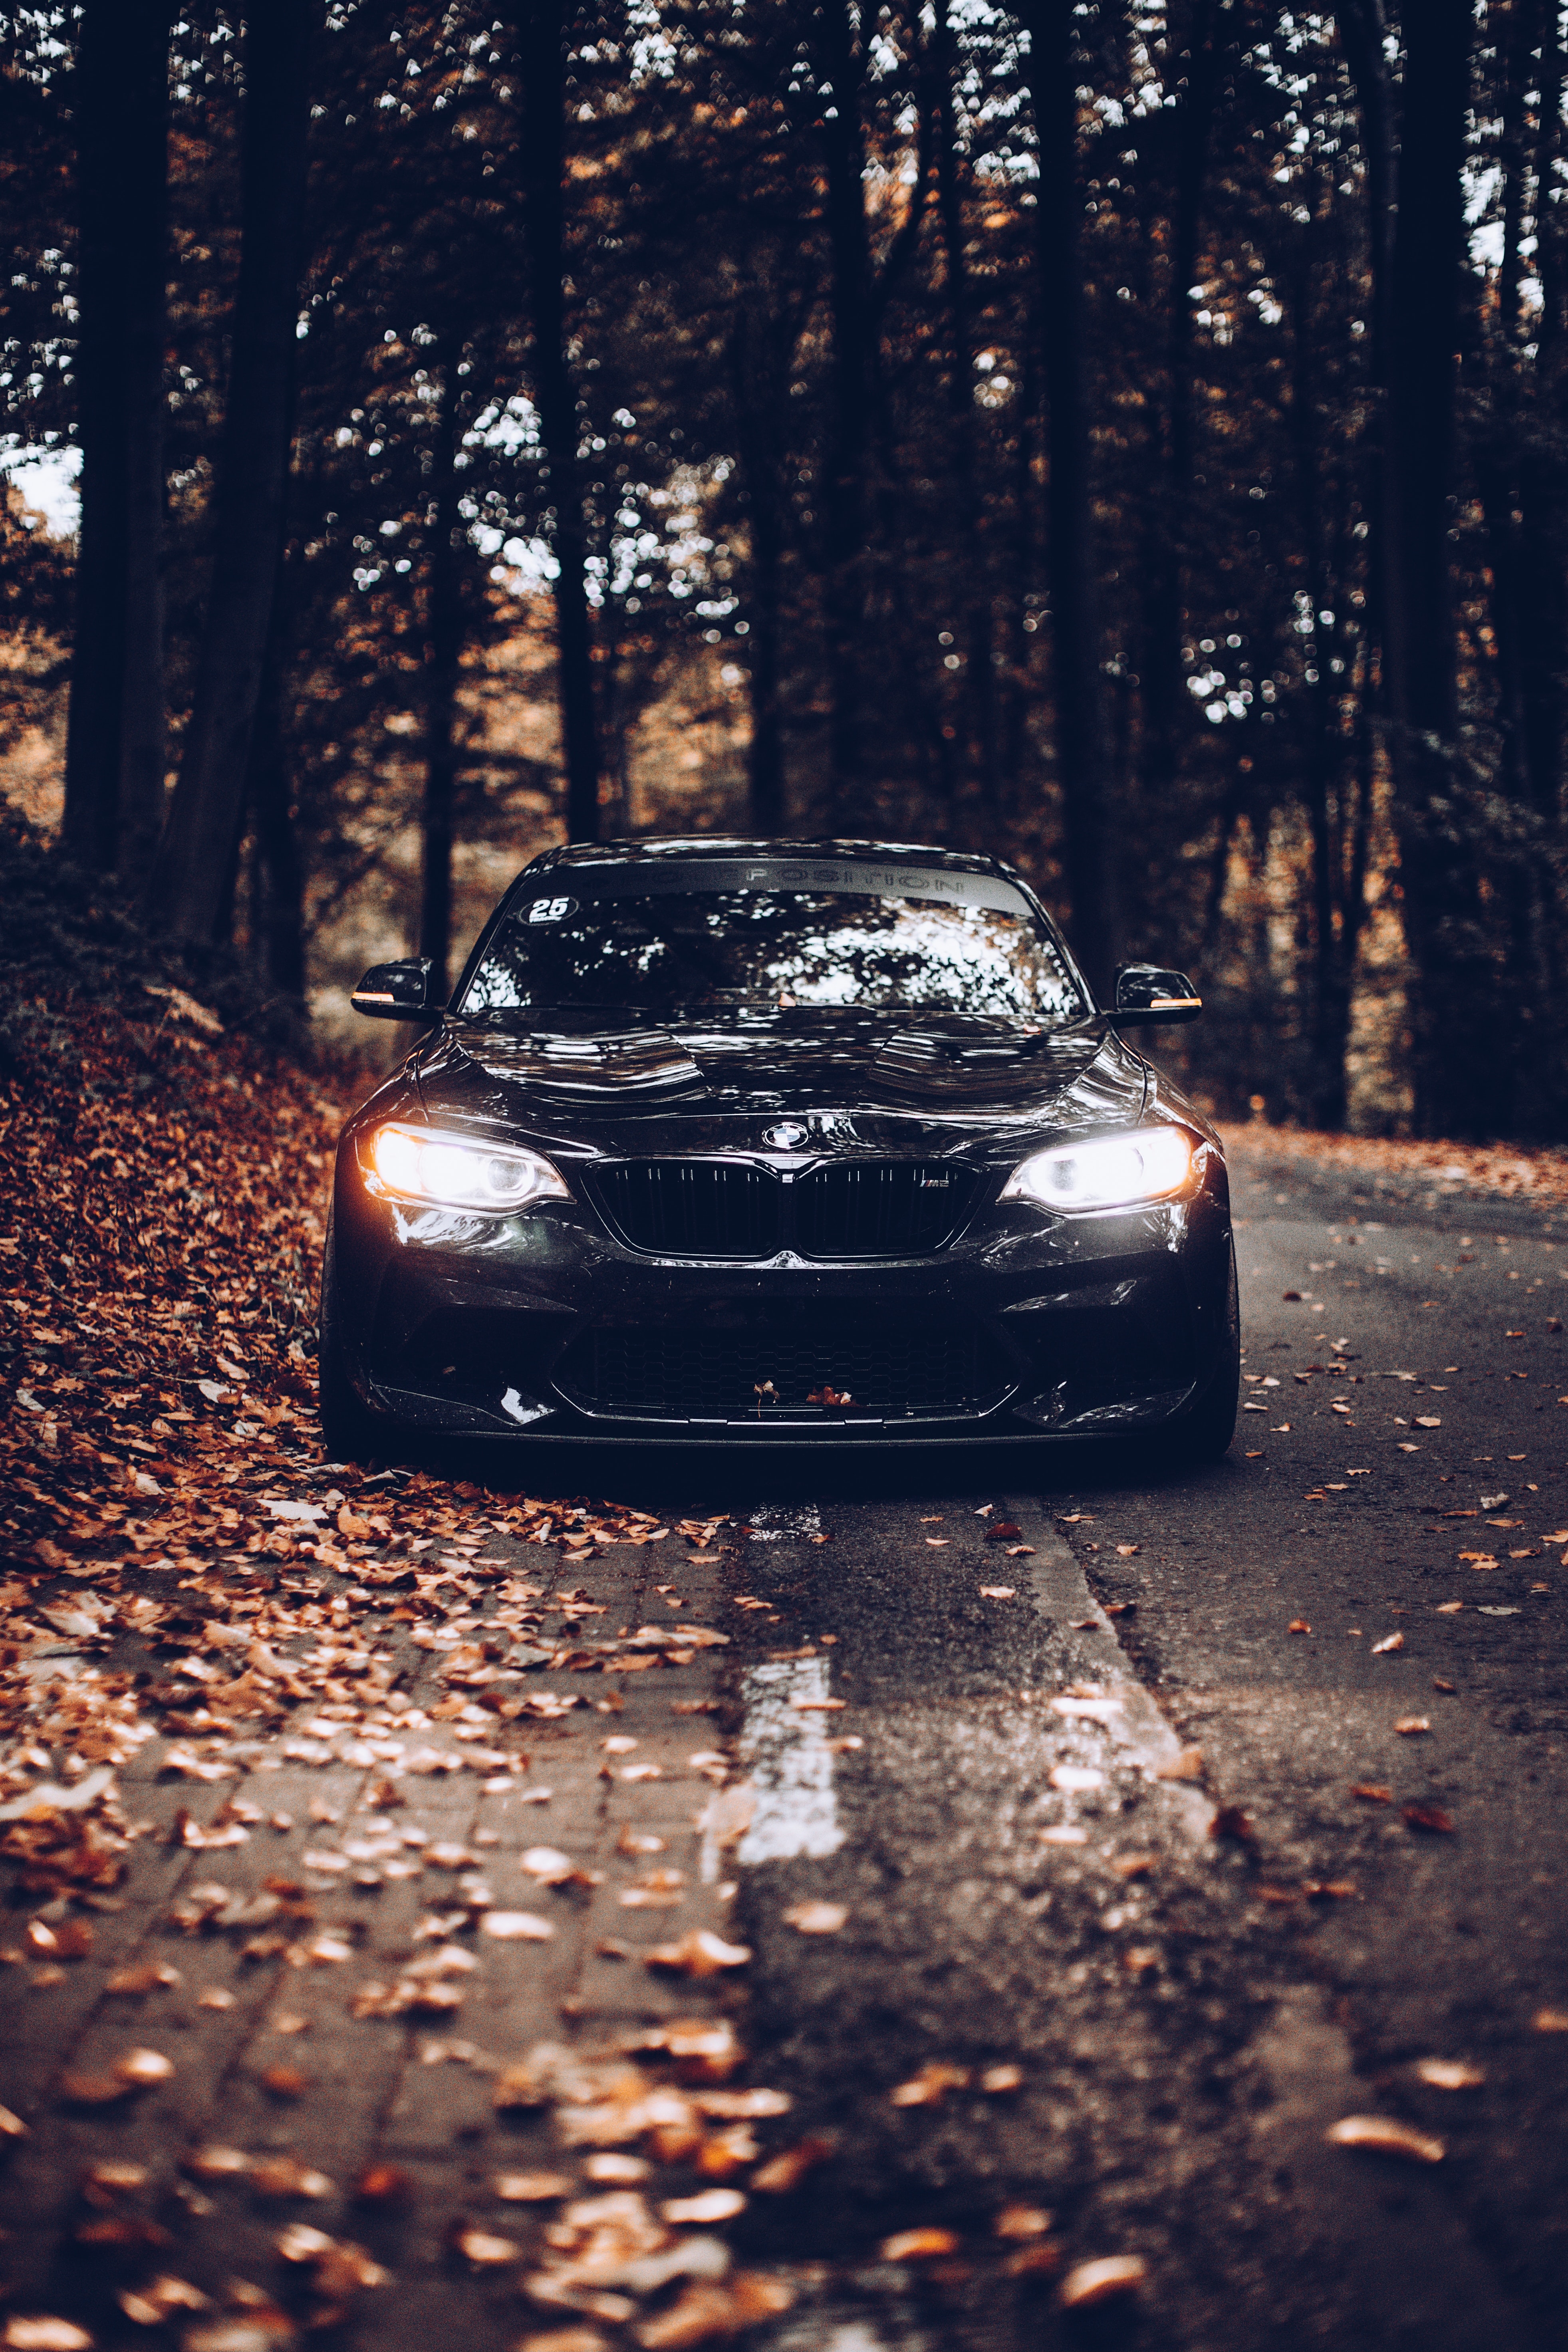 front view, bmw, autumn, cars, black, car wallpaper for mobile